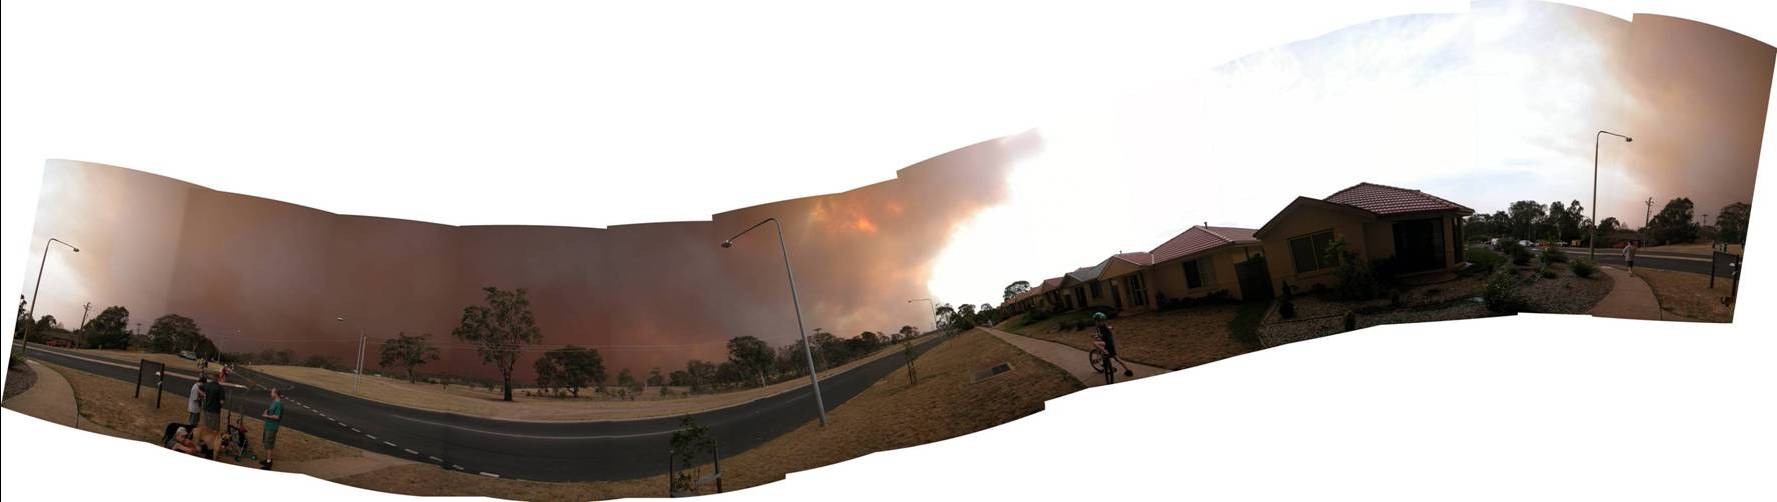 360 degree view of the approaching fire from the end of the road.Click on the picture for an expanded view. It will take some time to download, as the picture is 700KB big.